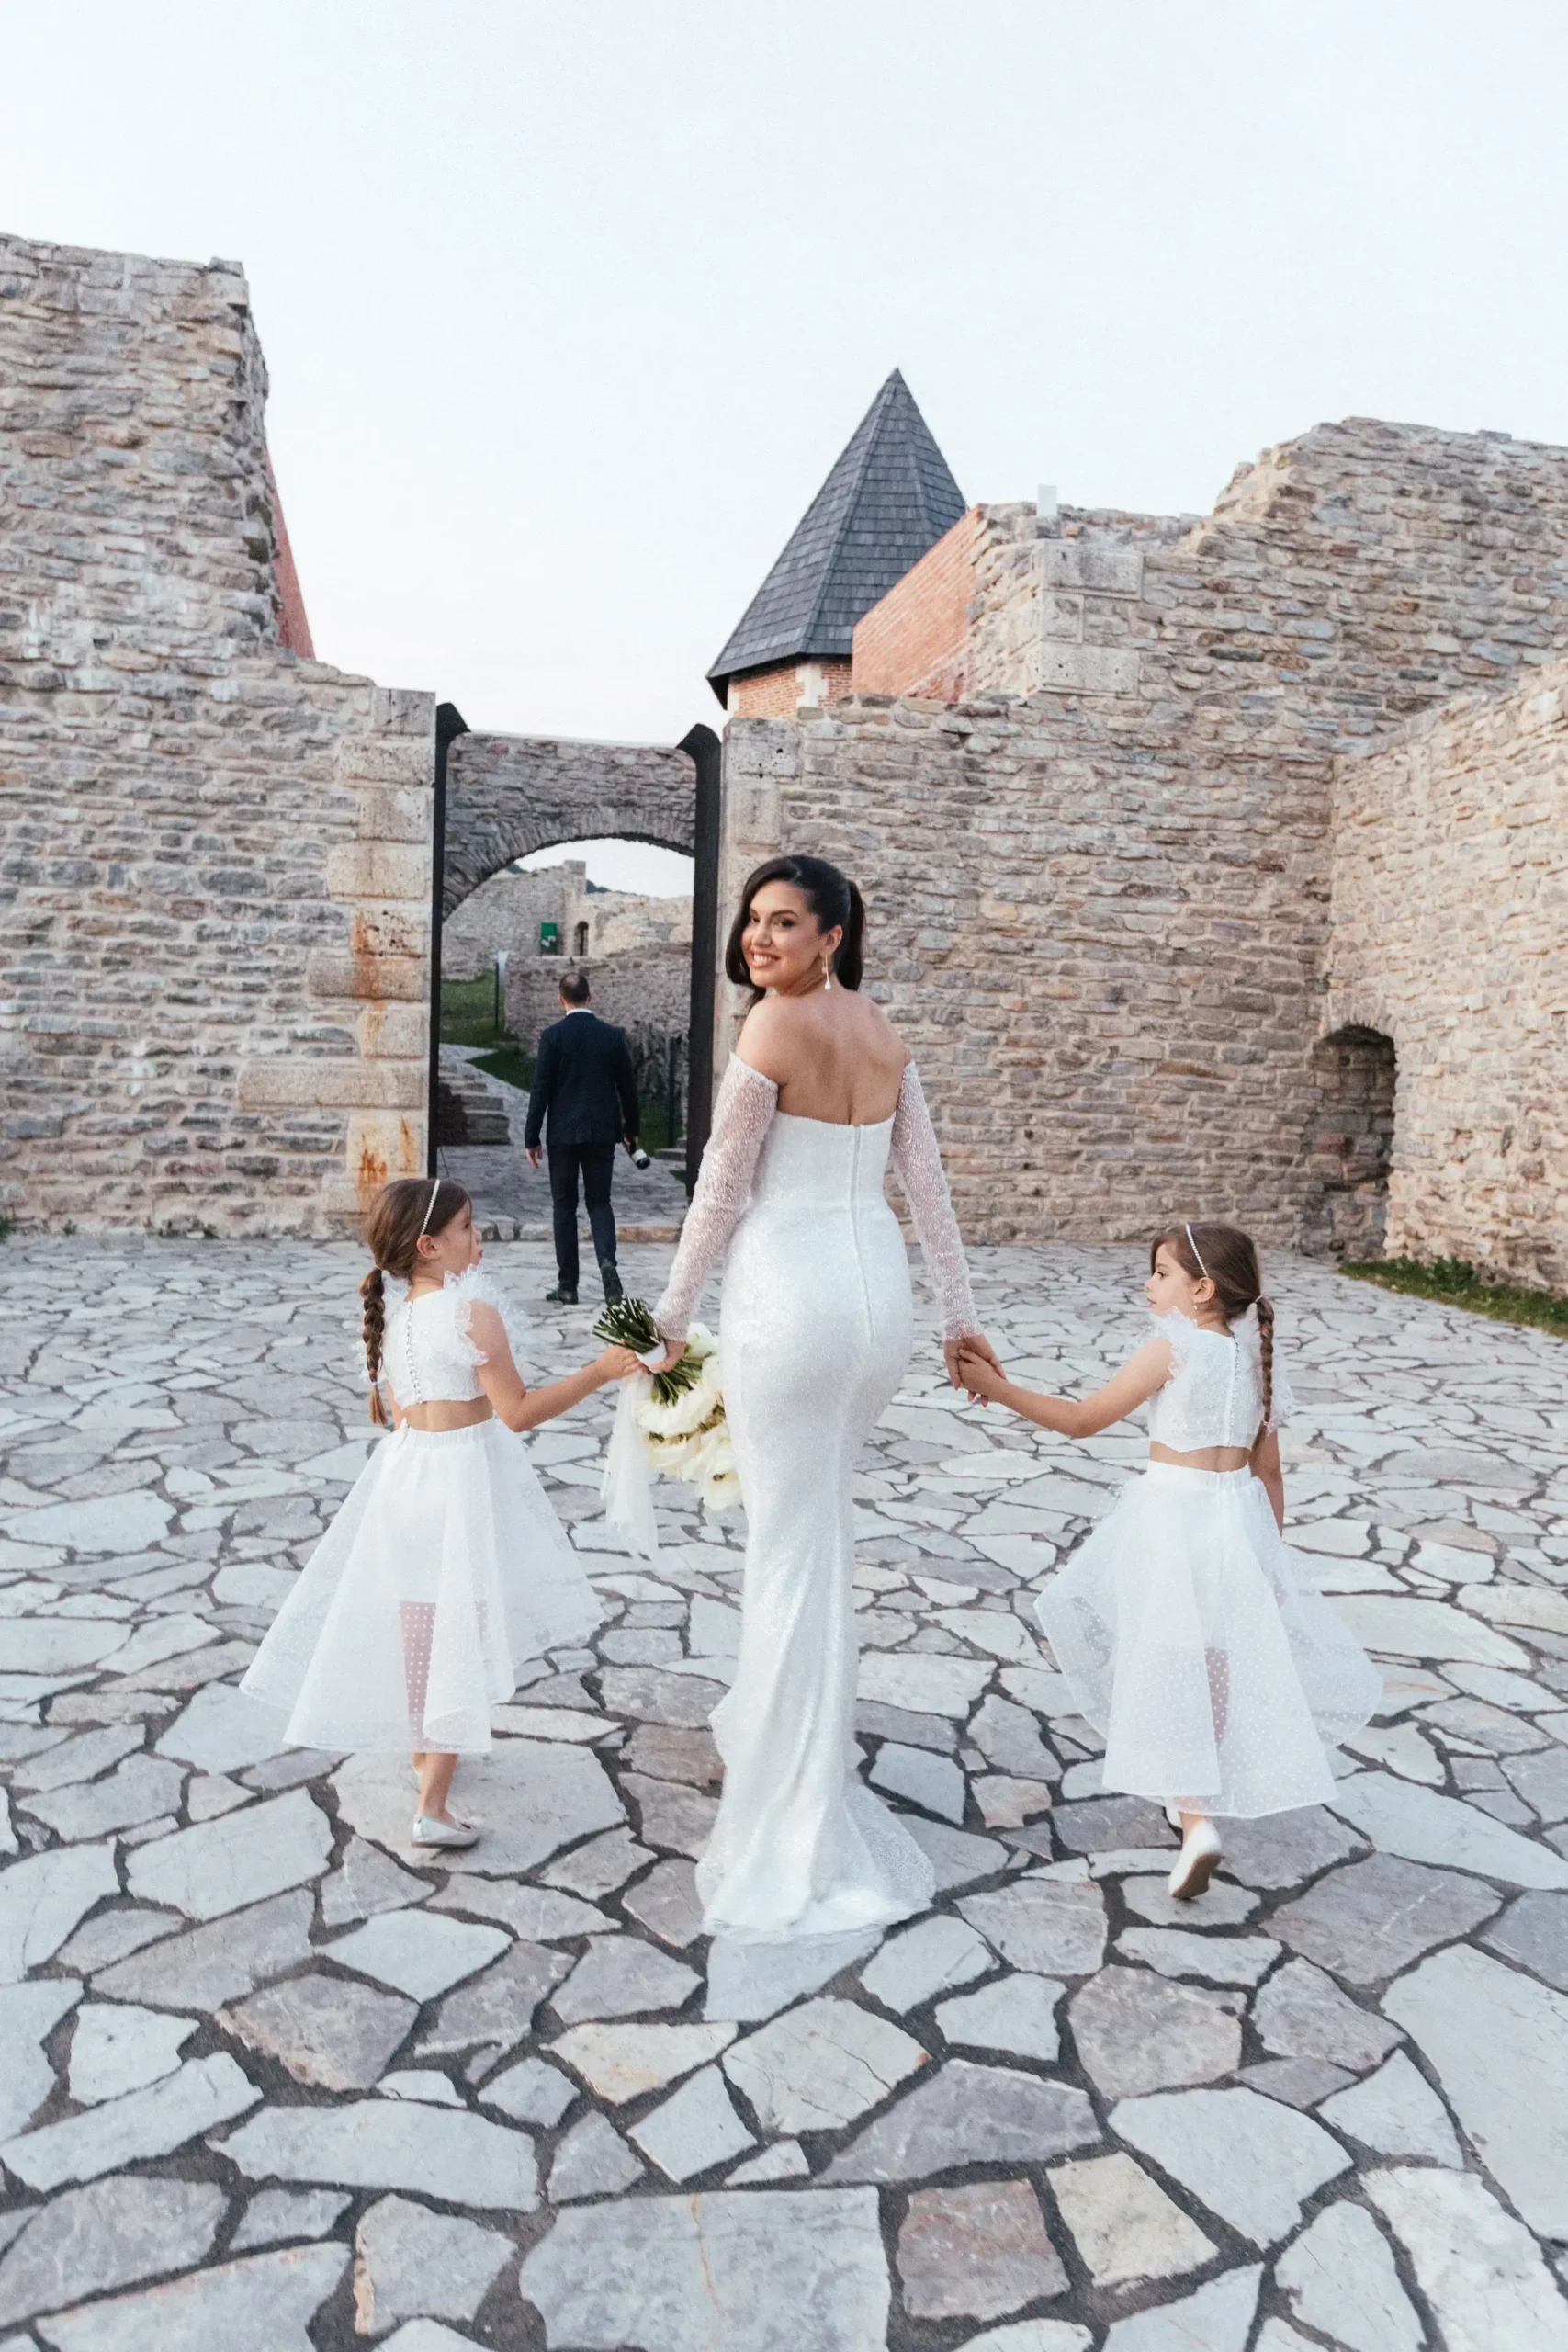 A person in a wedding dress holding hands with two children in white dresses, walking towards another person near an ancient Medvedgrad stone structure.